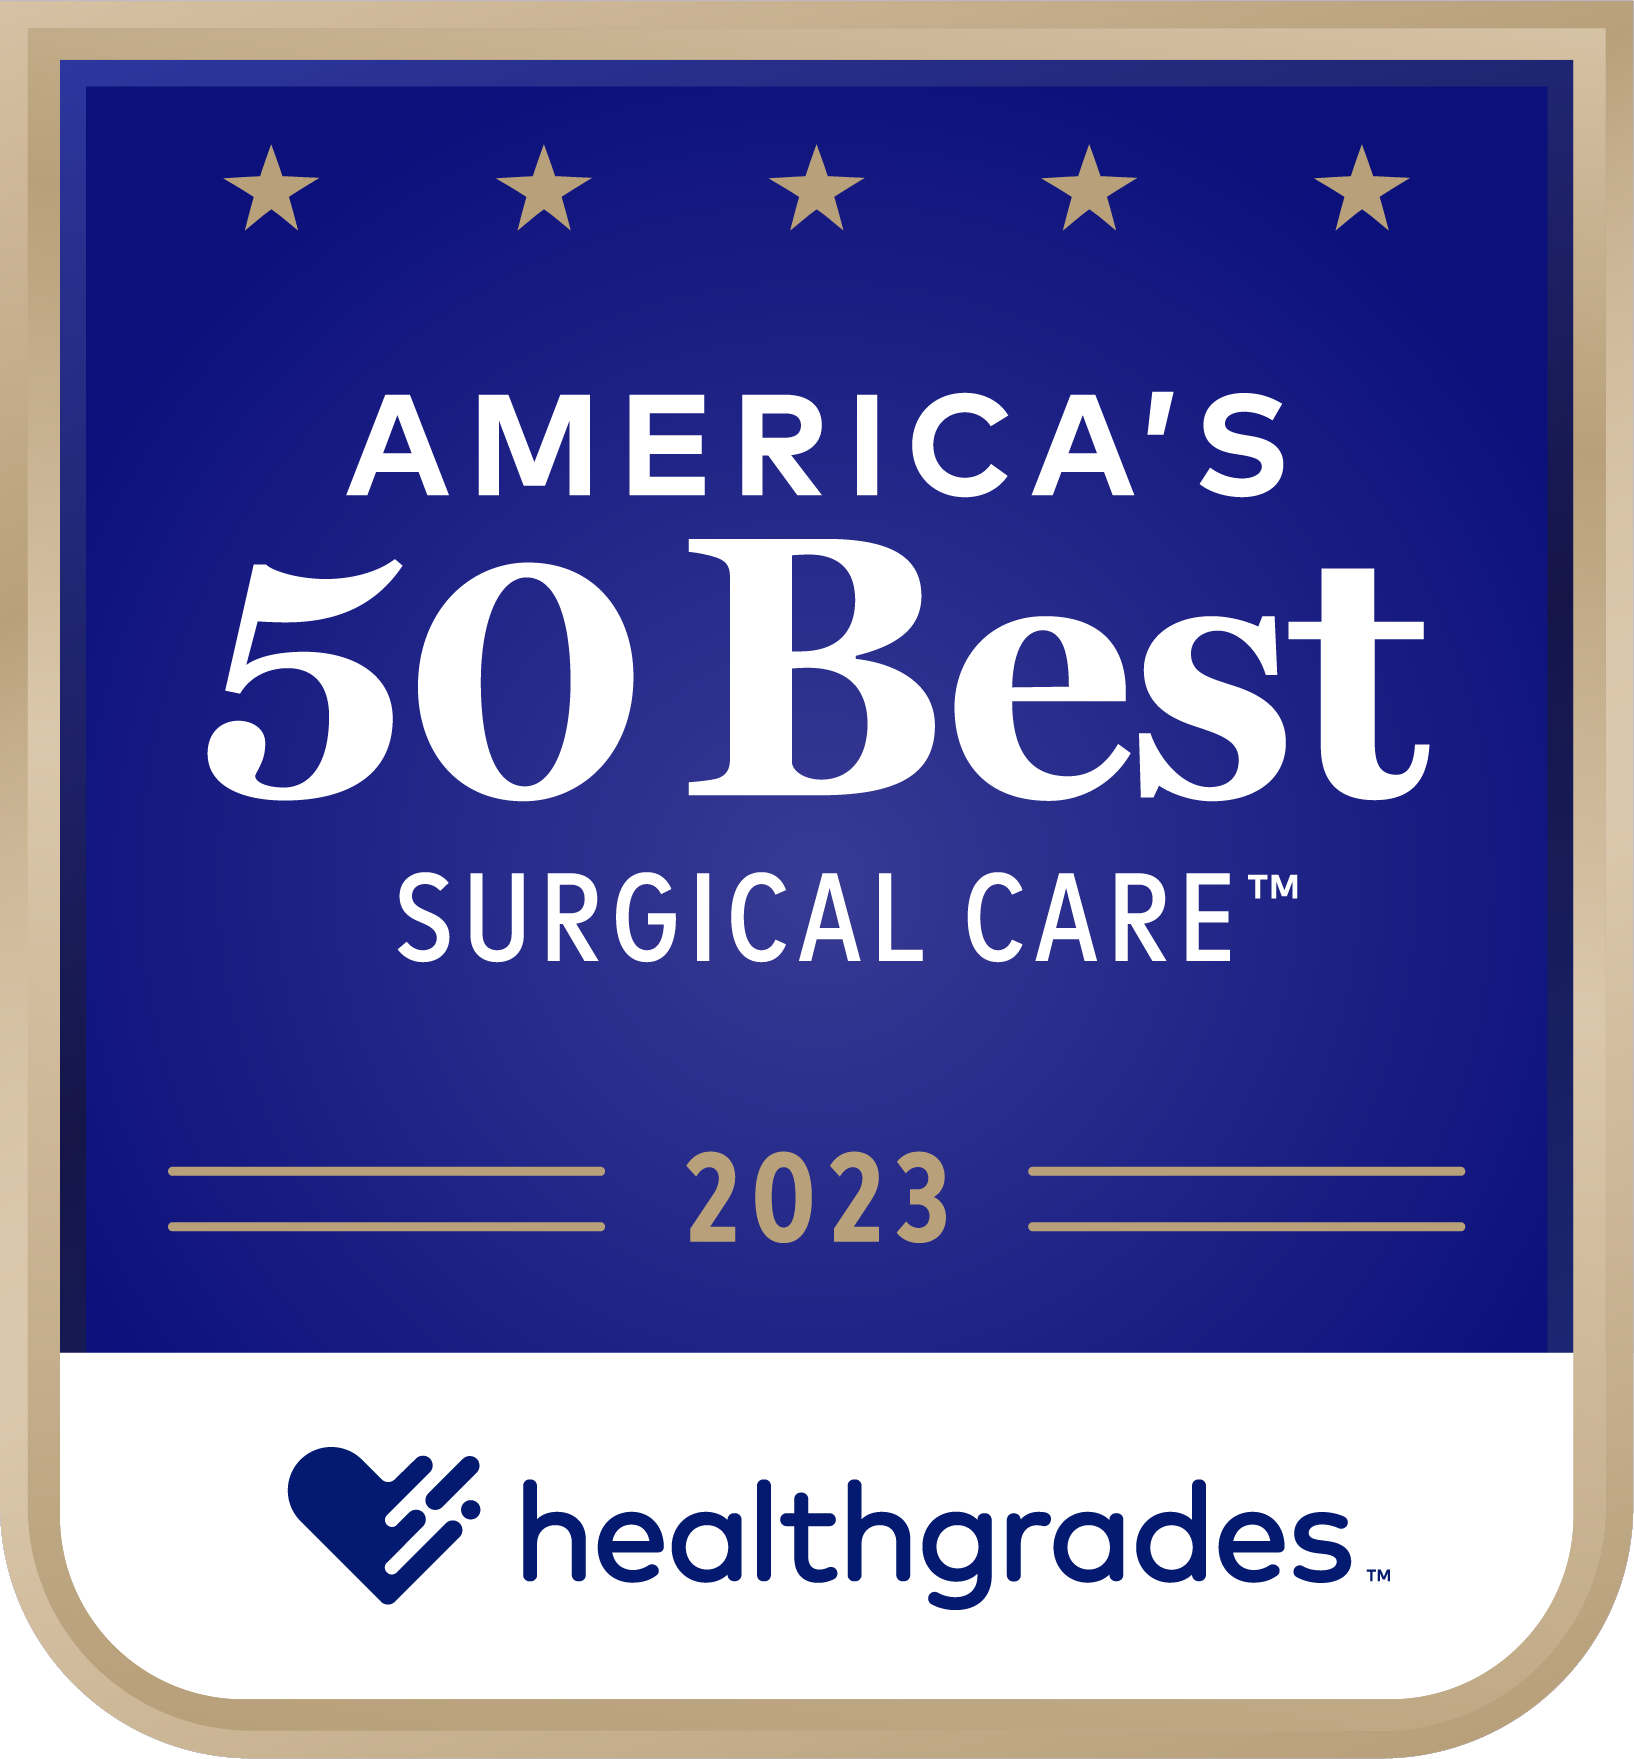 HG_Americas_50_Best_Surgical_Care_Award_Image_2023.png